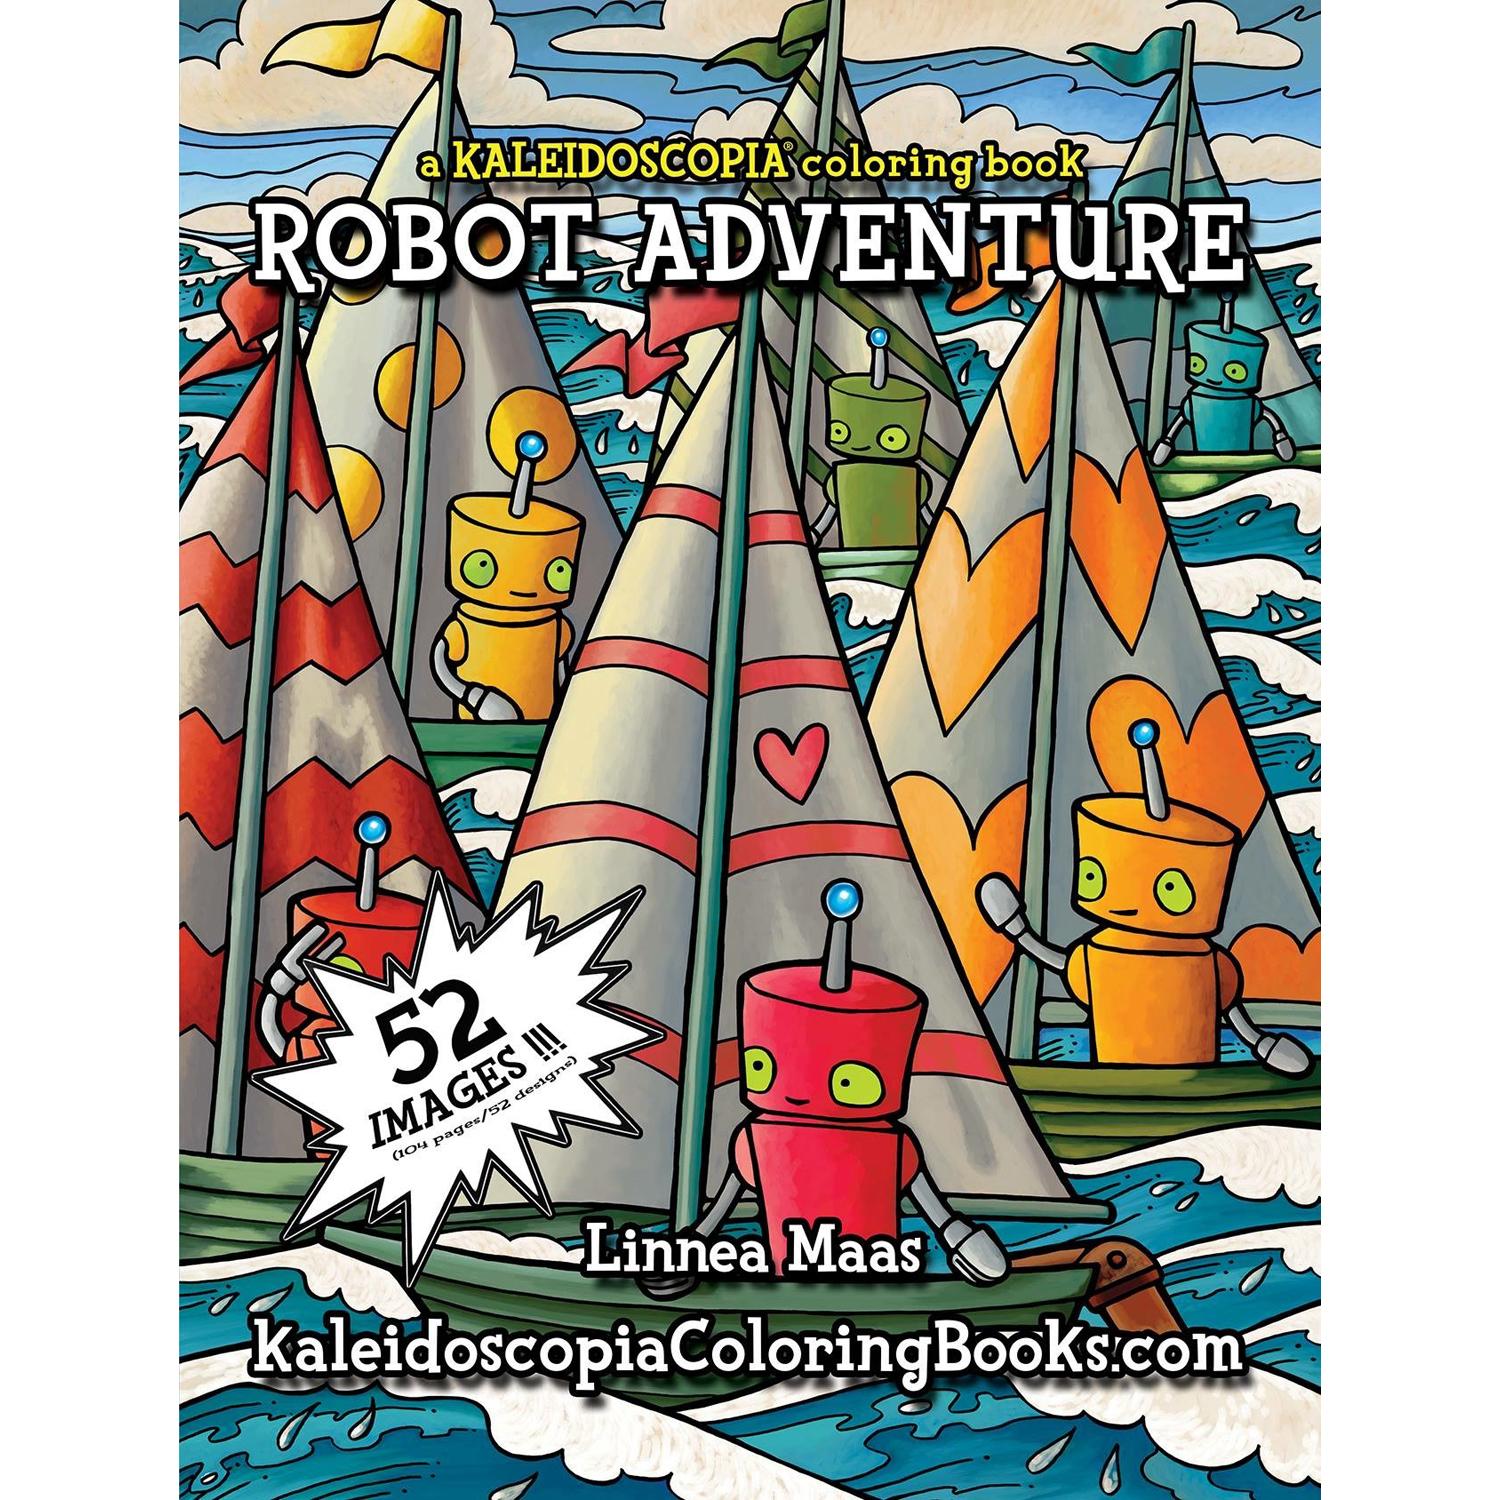 Front cover of Robot Adventure: Inside The Robot coloring book b